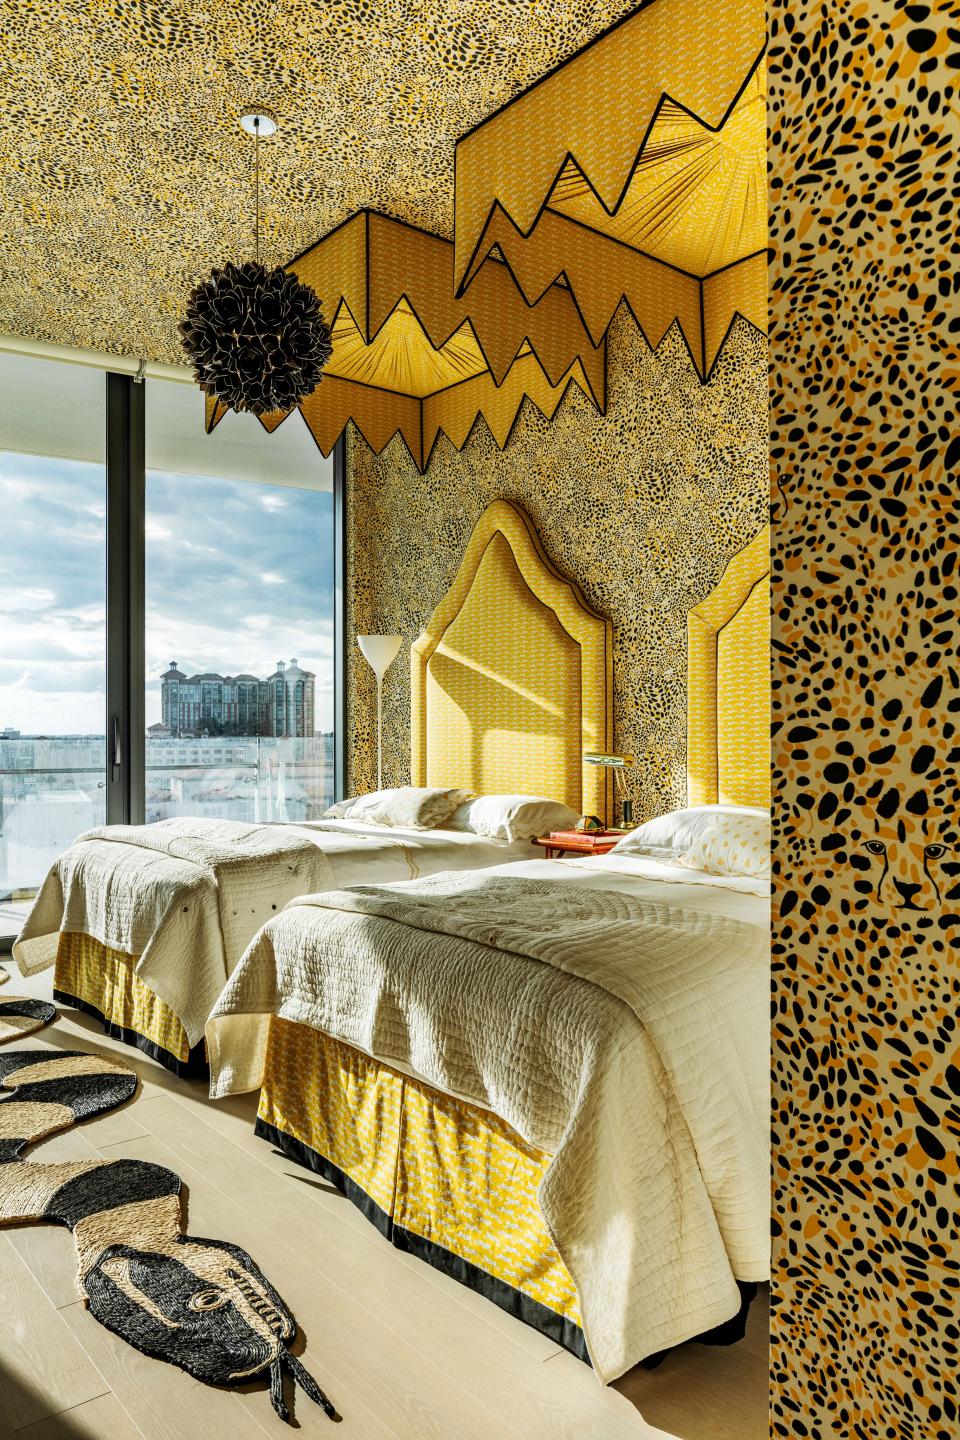 Canopies and a leopard-print wall covering bring whimsy to another guest bedroom.